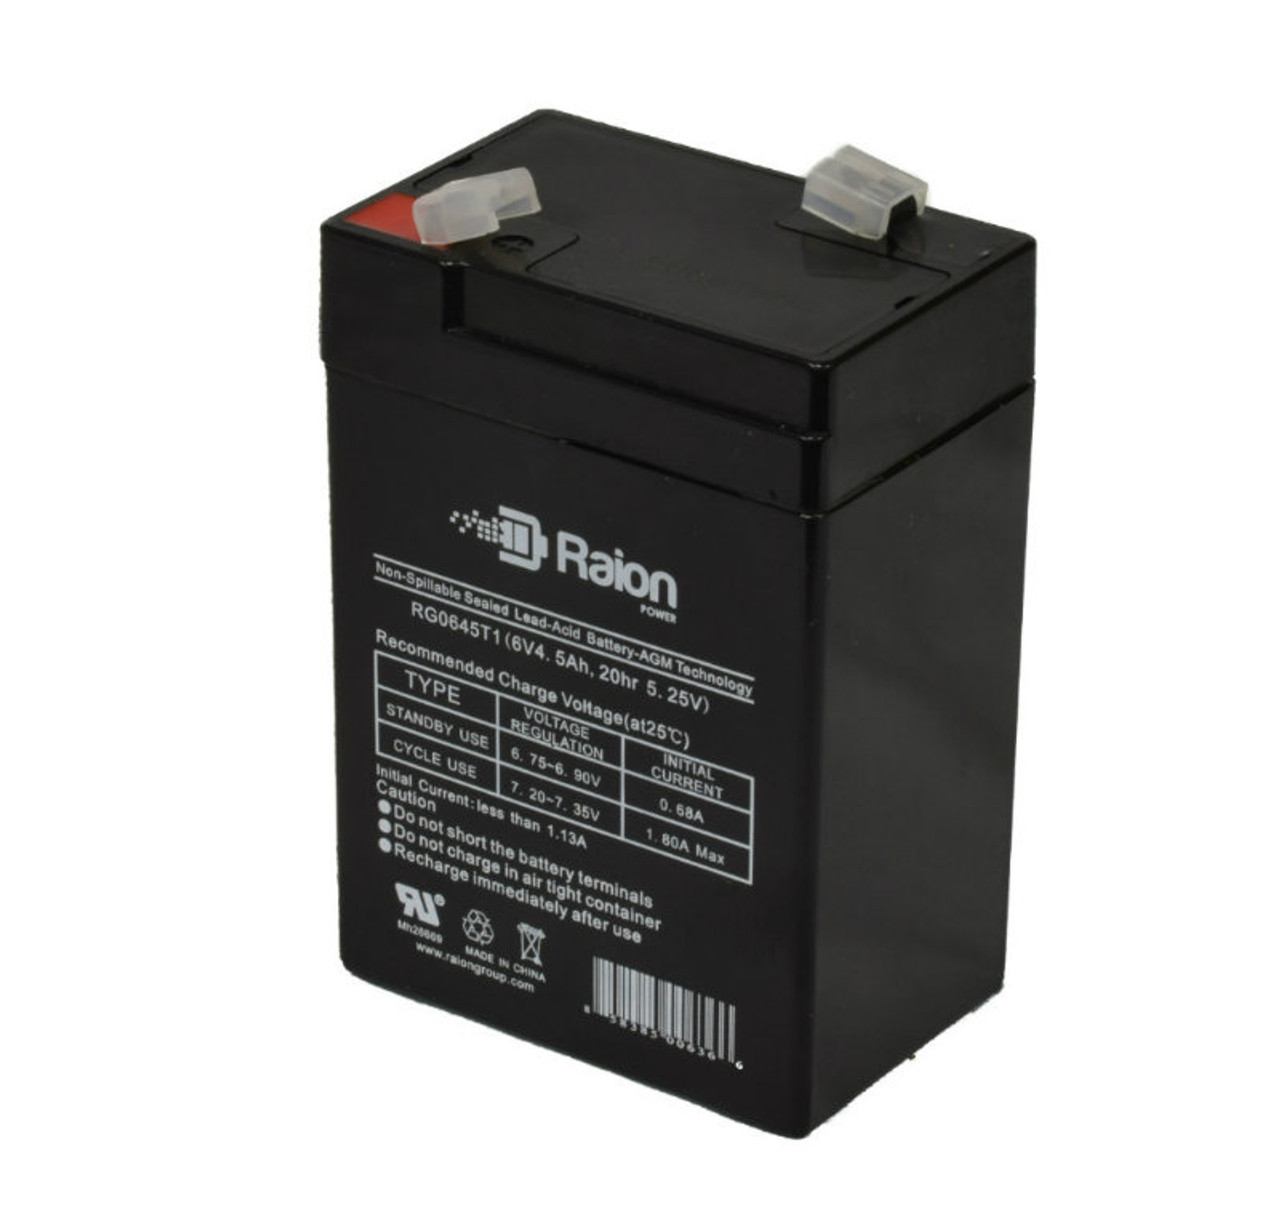 Raion Power RG0645T1 6V 4.5Ah Replacement Battery Cartridge for Criticare Systems Pulse Oximeter 50445